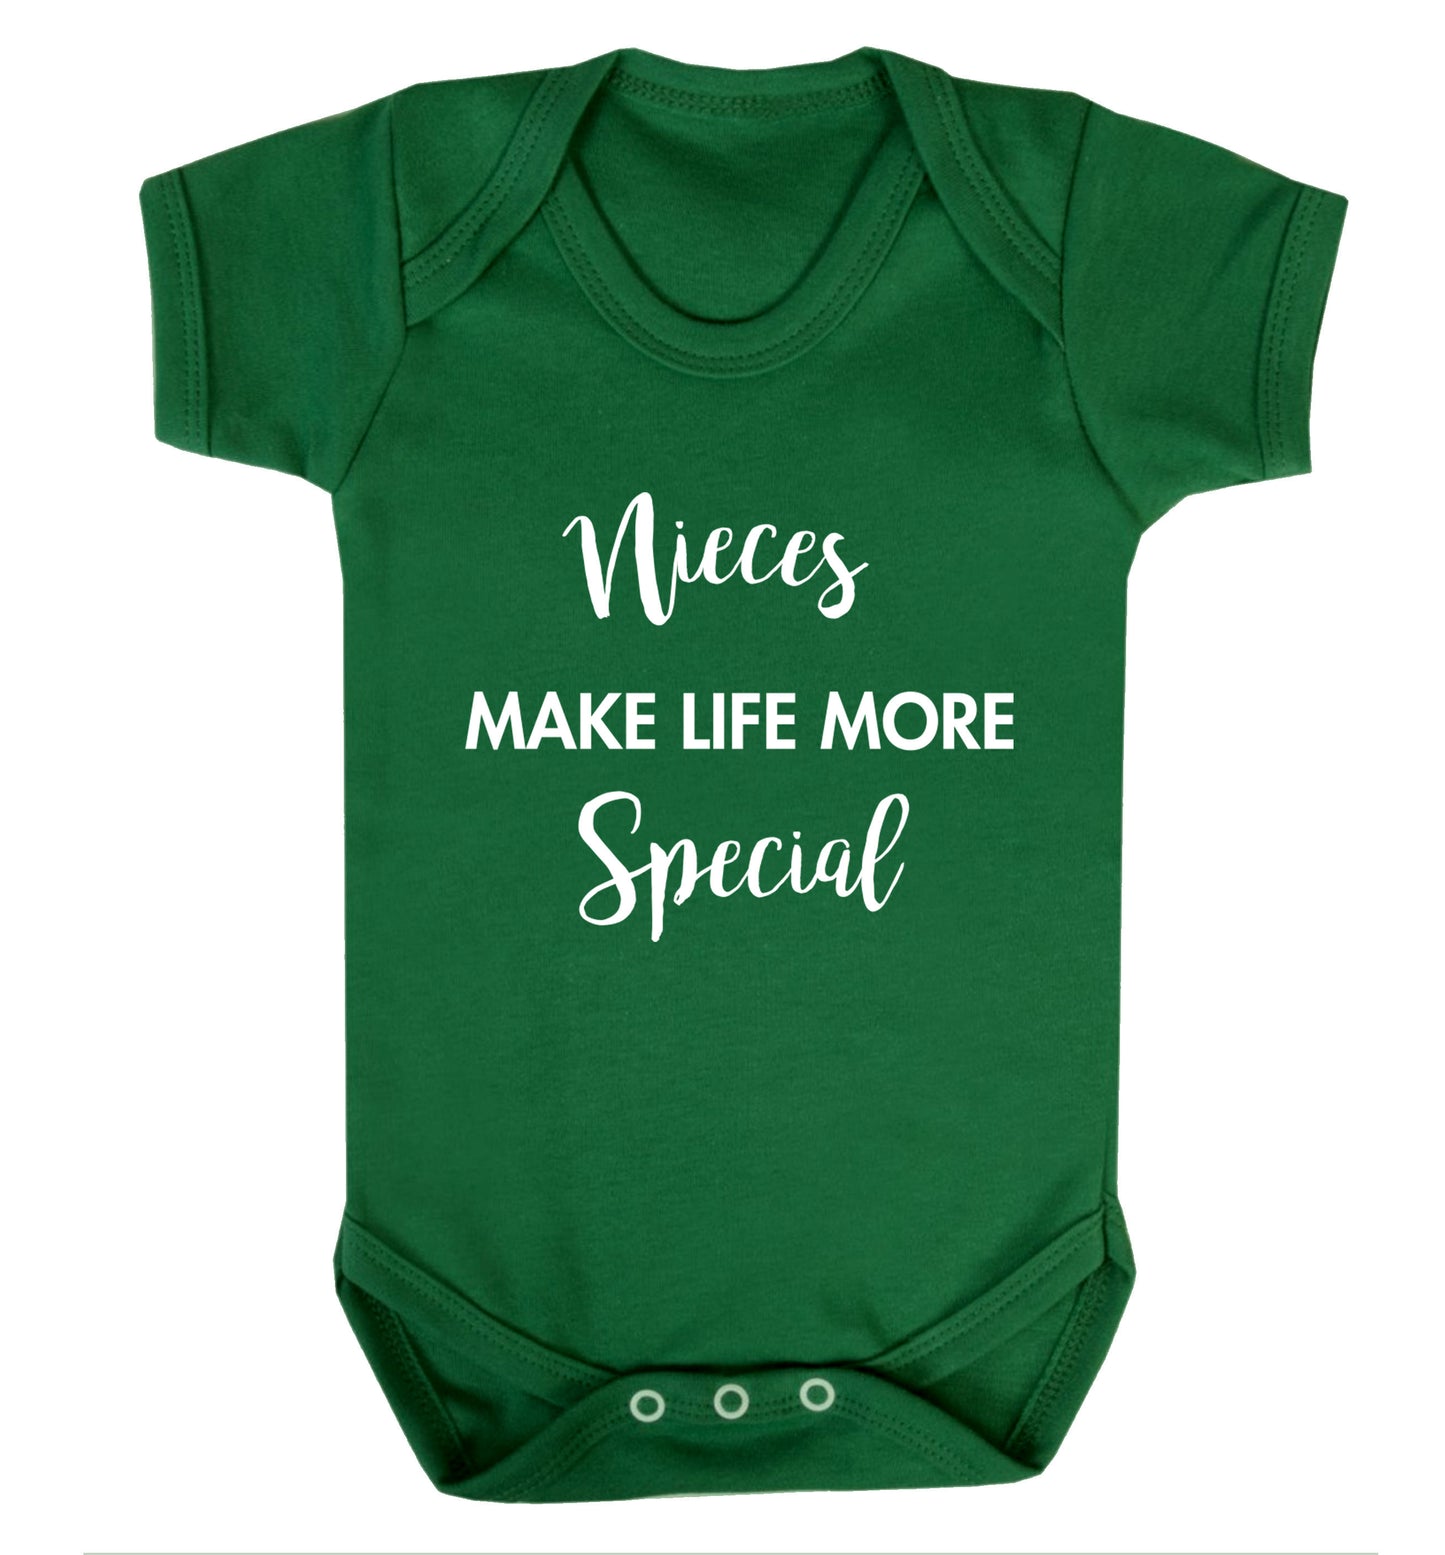 Nieces make life more special Baby Vest green 18-24 months